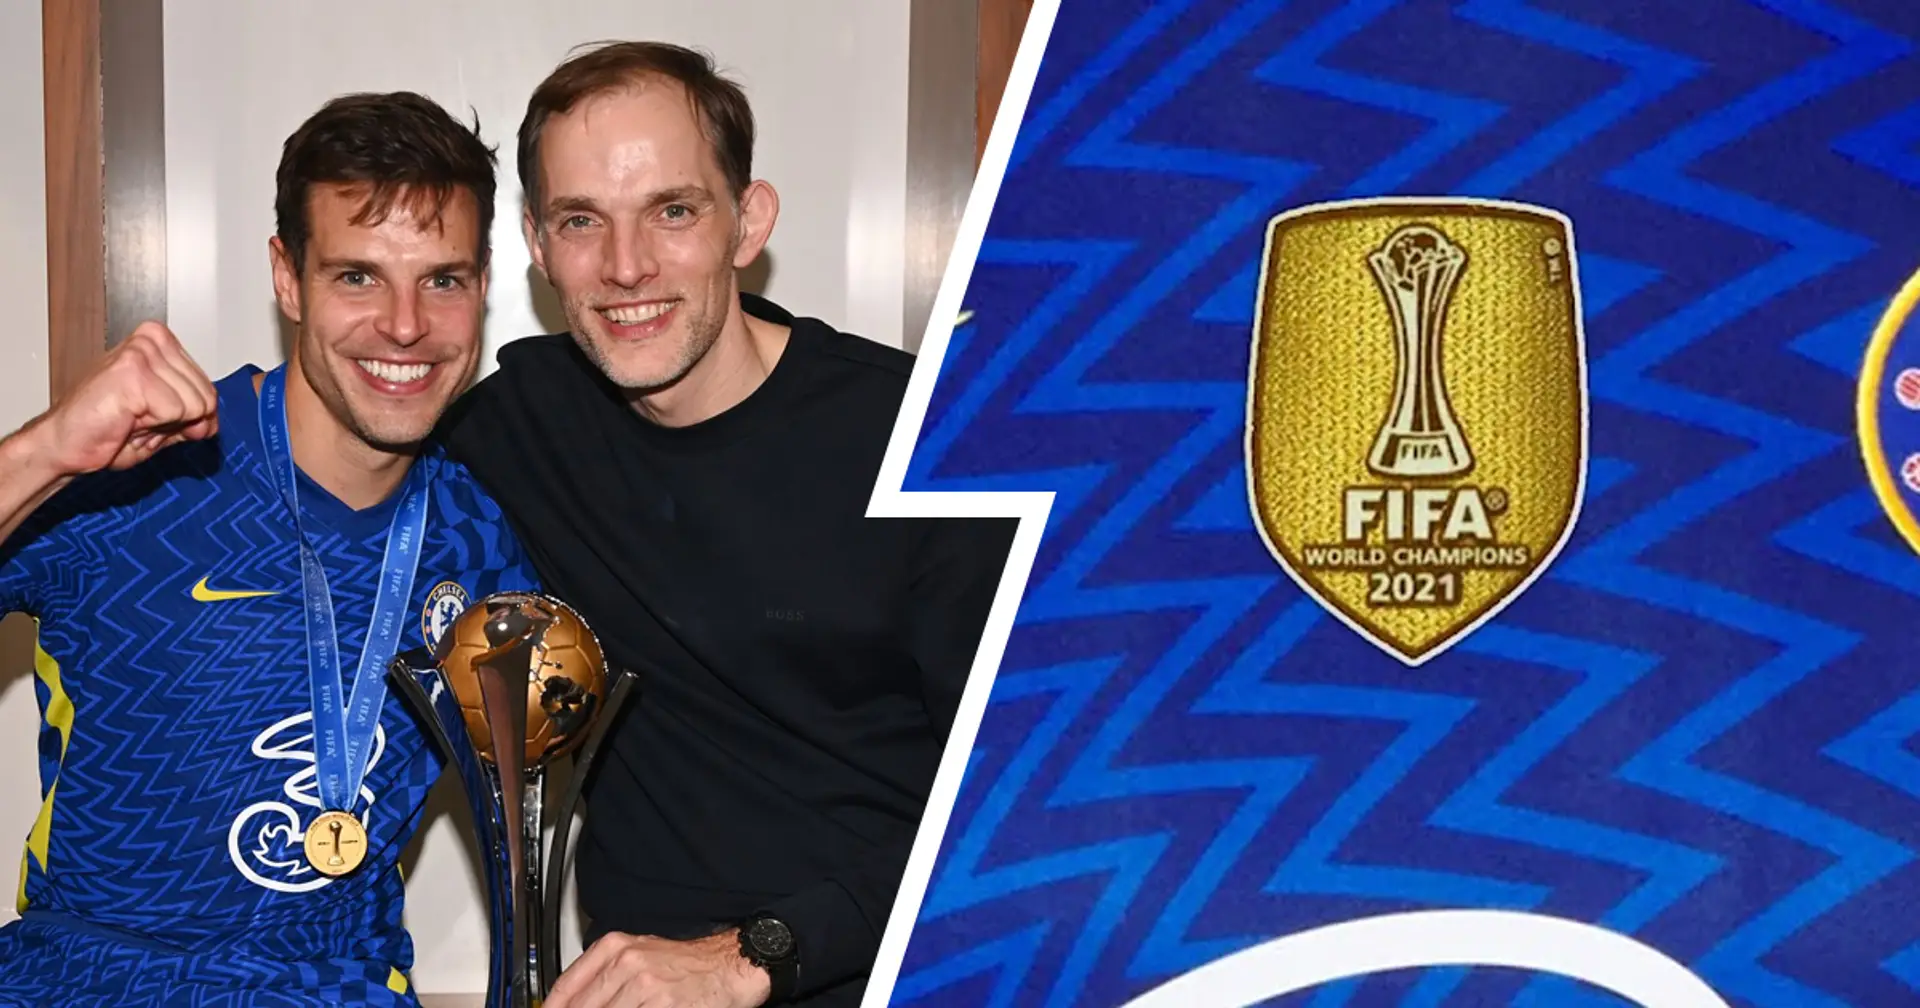 Chelsea Allowed to Wear FIFA Club World Cup Champions Badge For